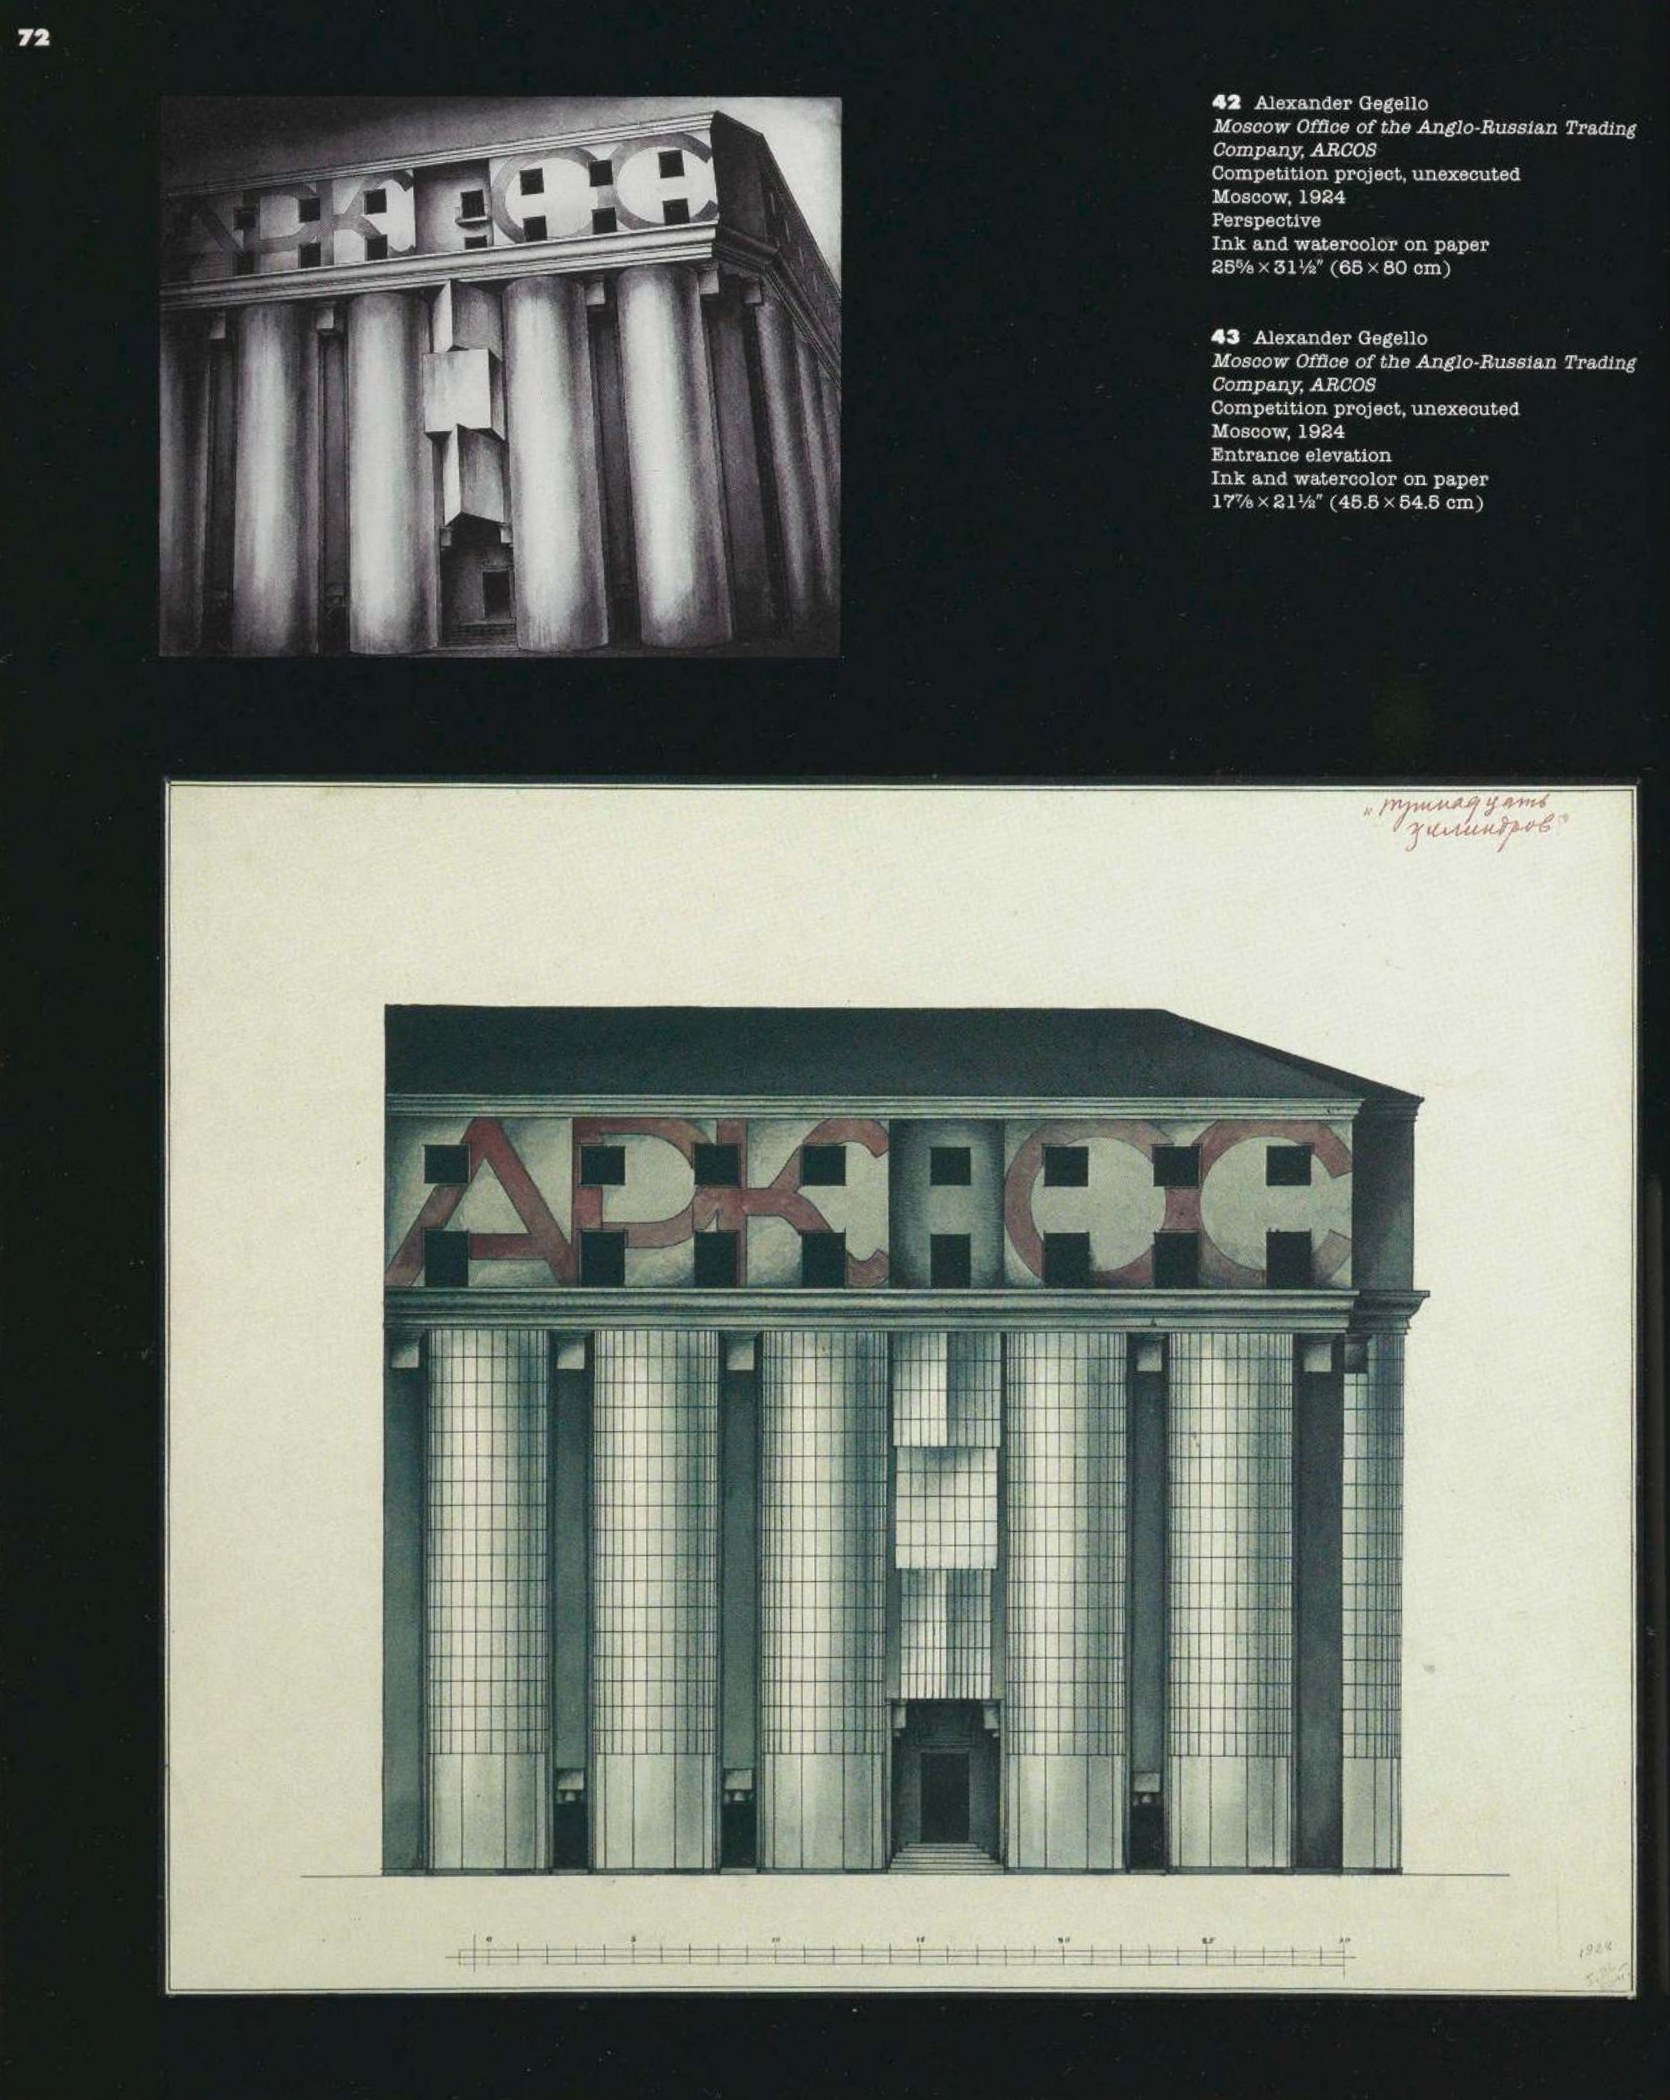 Architectural drawings of the Russian architectural avant-garde / Еssay by Catherine Cooke. — New York : The Museum of Modern Art, 1990